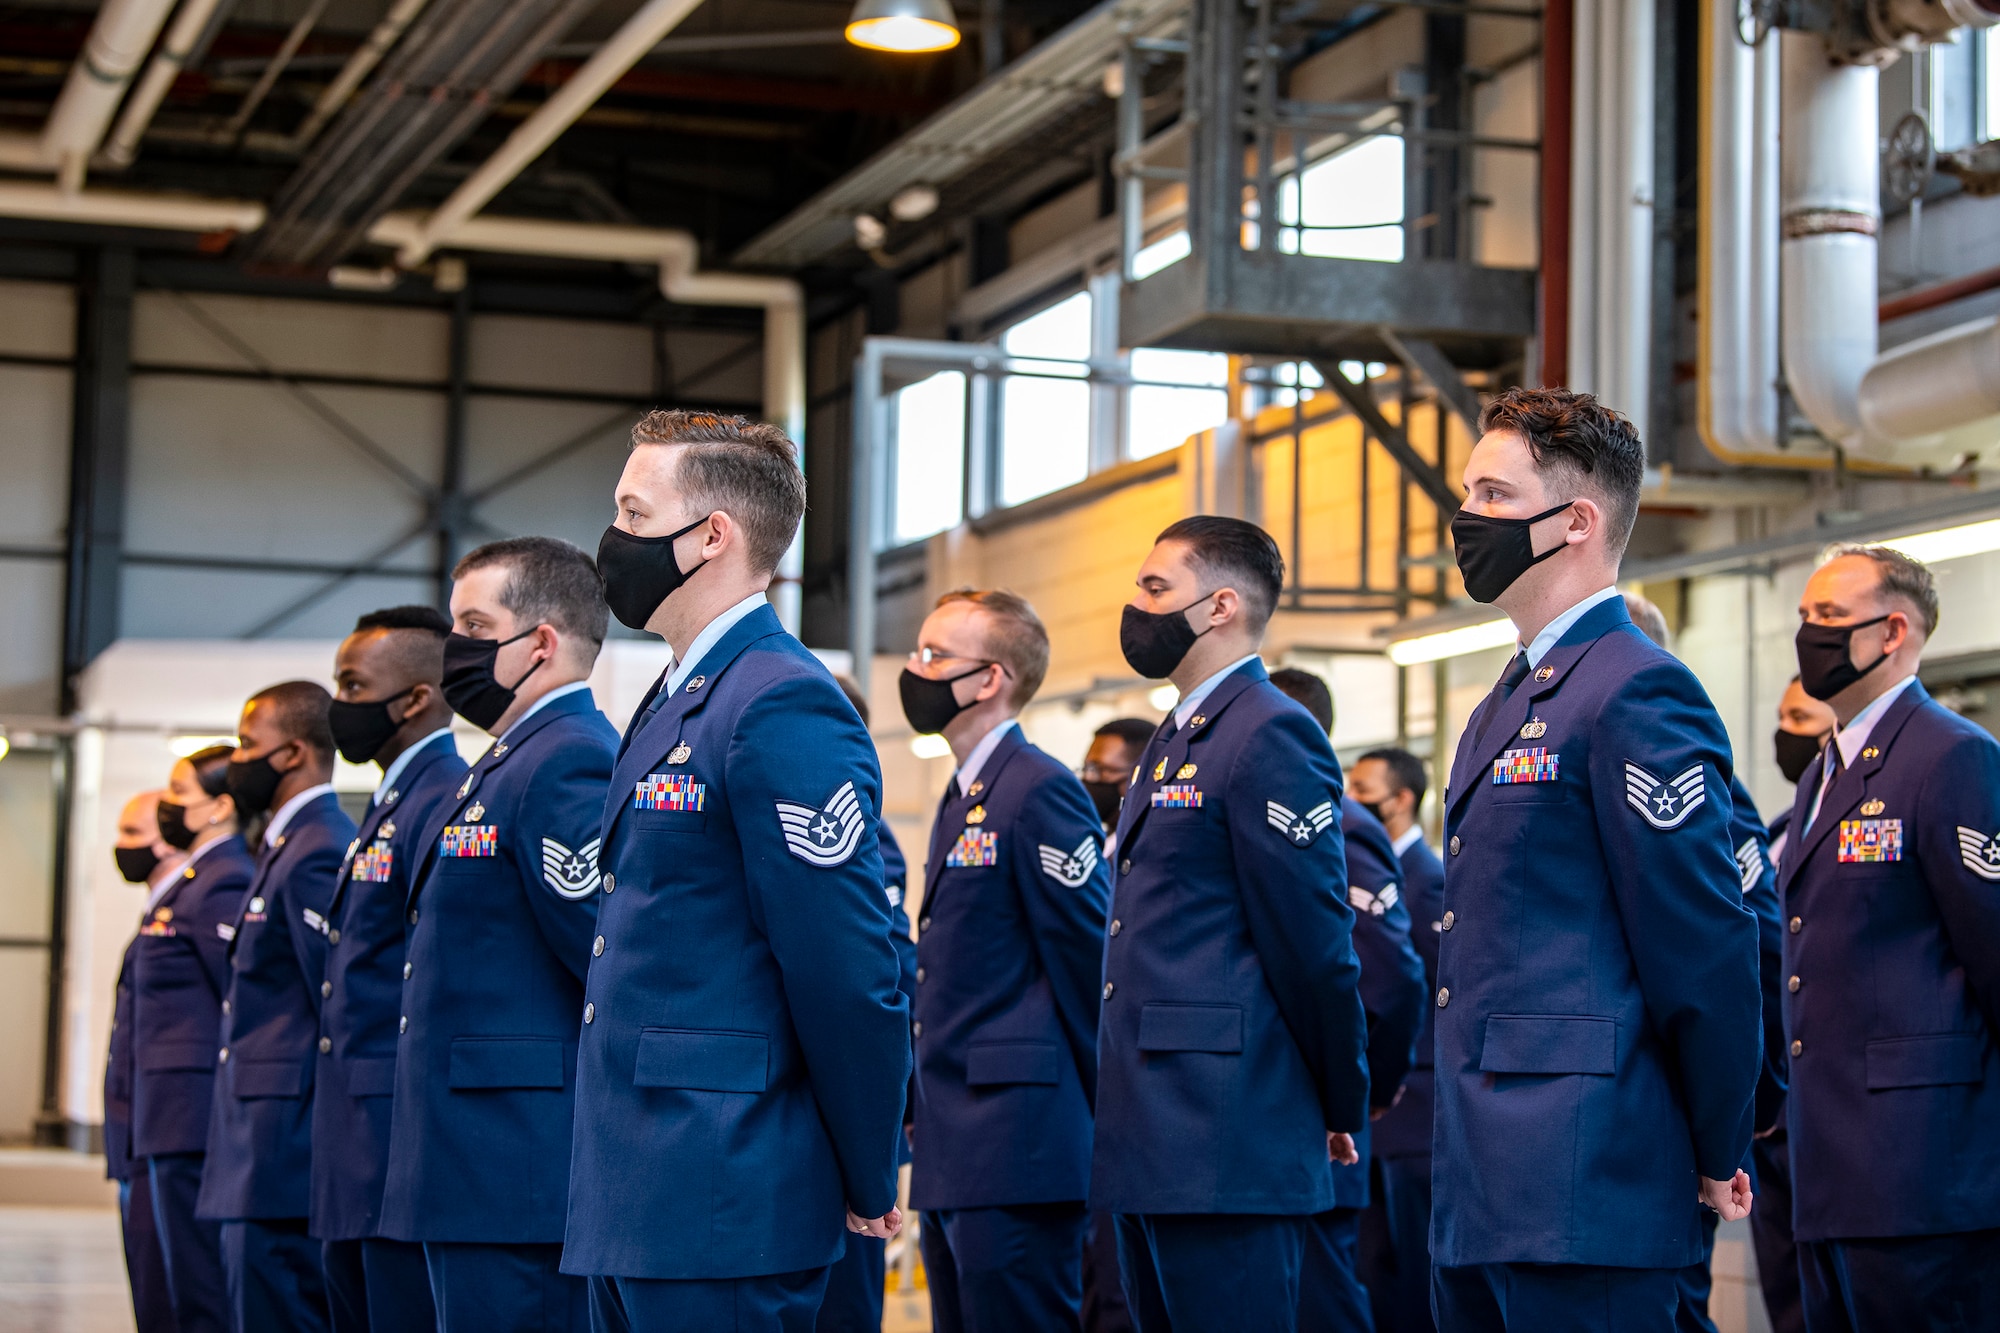 Airmen from the 423rd Communications Squadron stand at ease during a change of command ceremony at RAF Alconbury, England, June 25, 2021. During the ceremony Lt. Col. Brian Beauter, relinquished command of the 423rd CS to Maj. Erica Balfour. (U.S. Air Force photo by Senior Airman Eugene Oliver)